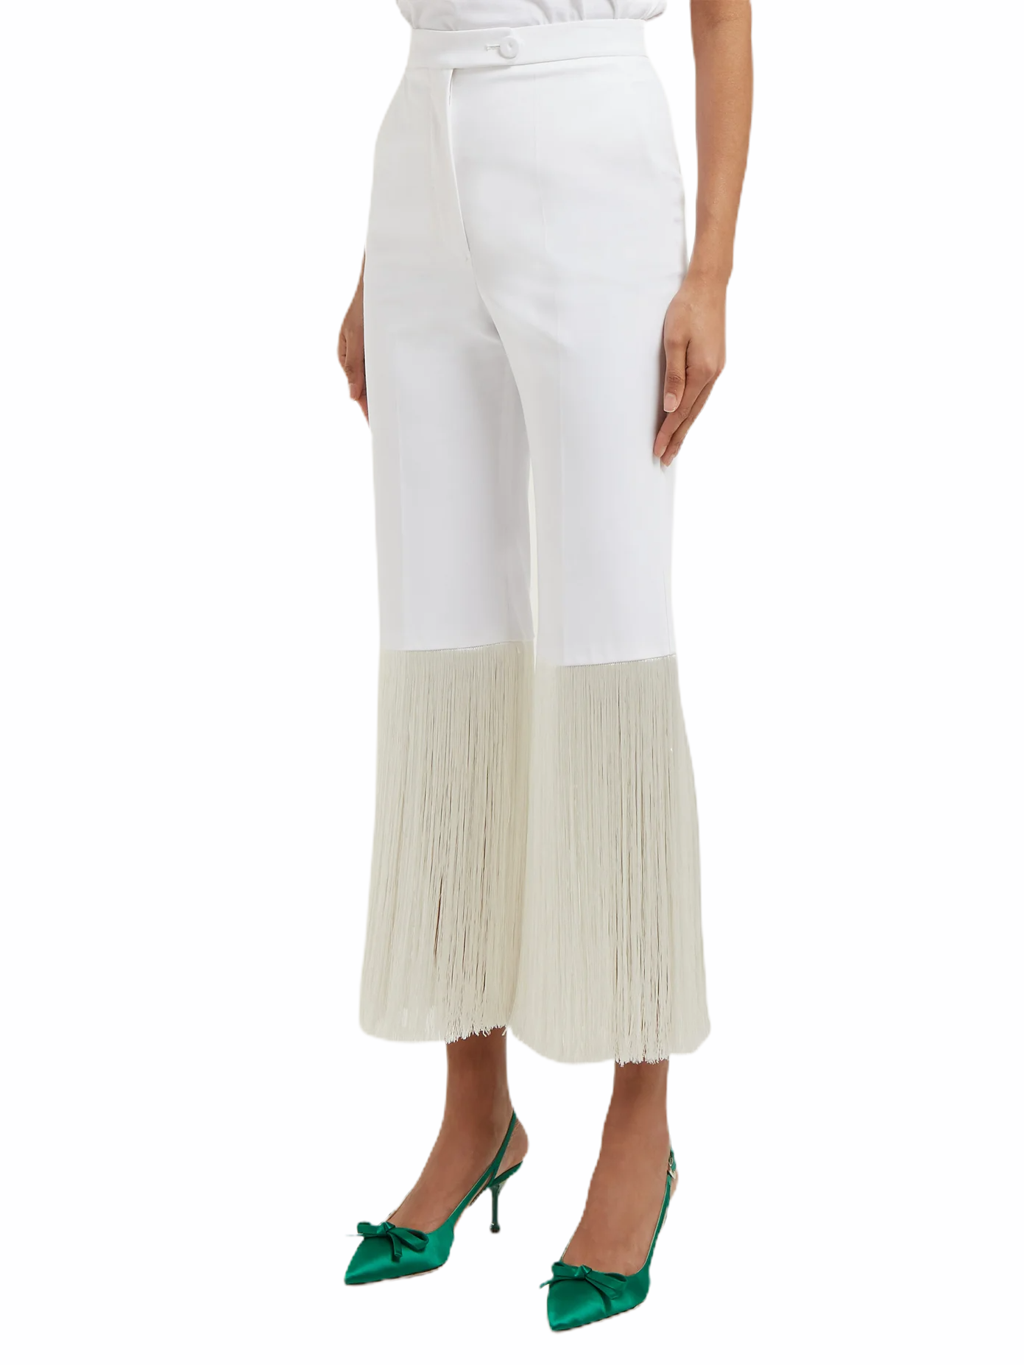 Fringed cotton-blend trousers